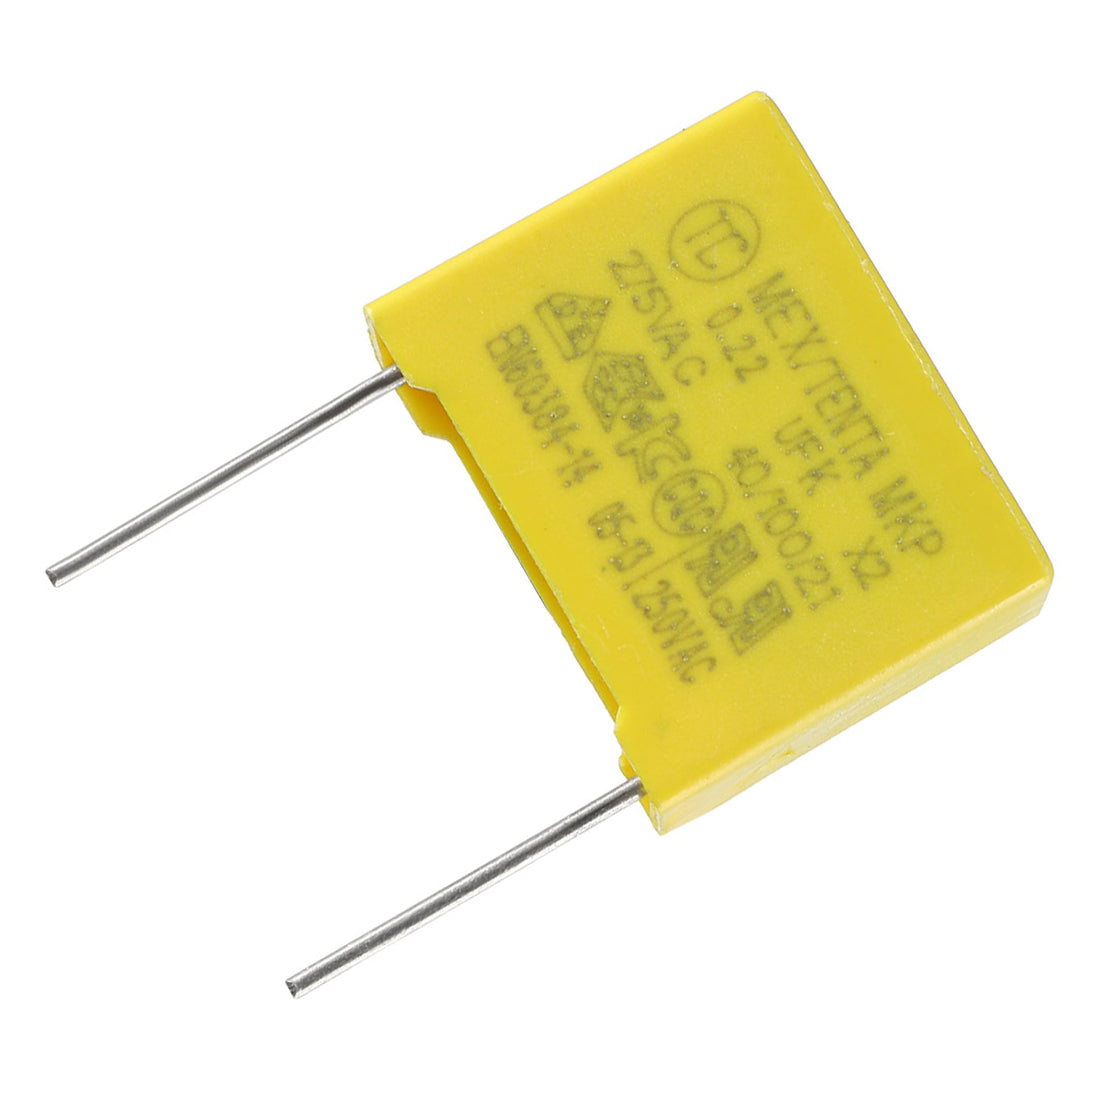 uxcell Uxcell Safety Capacitors Polypropylene Film 0.22uF 275VAC X2 MKP 10 Pcs